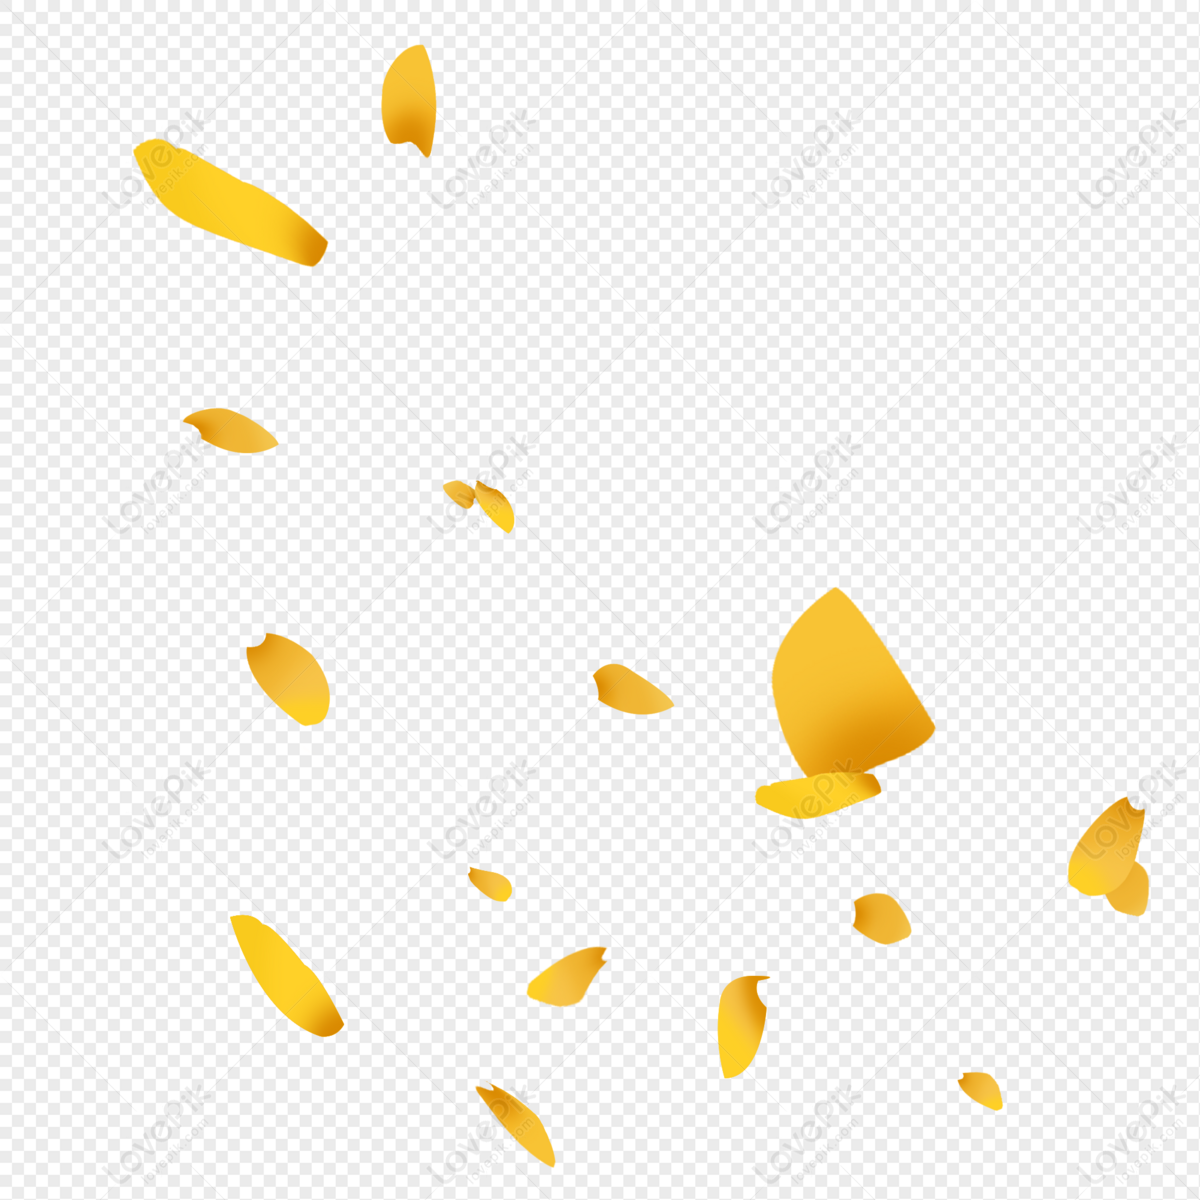 Yellow Flower Petals PNG Transparent Background And Clipart Image For Free  Download - Lovepik | 401490810